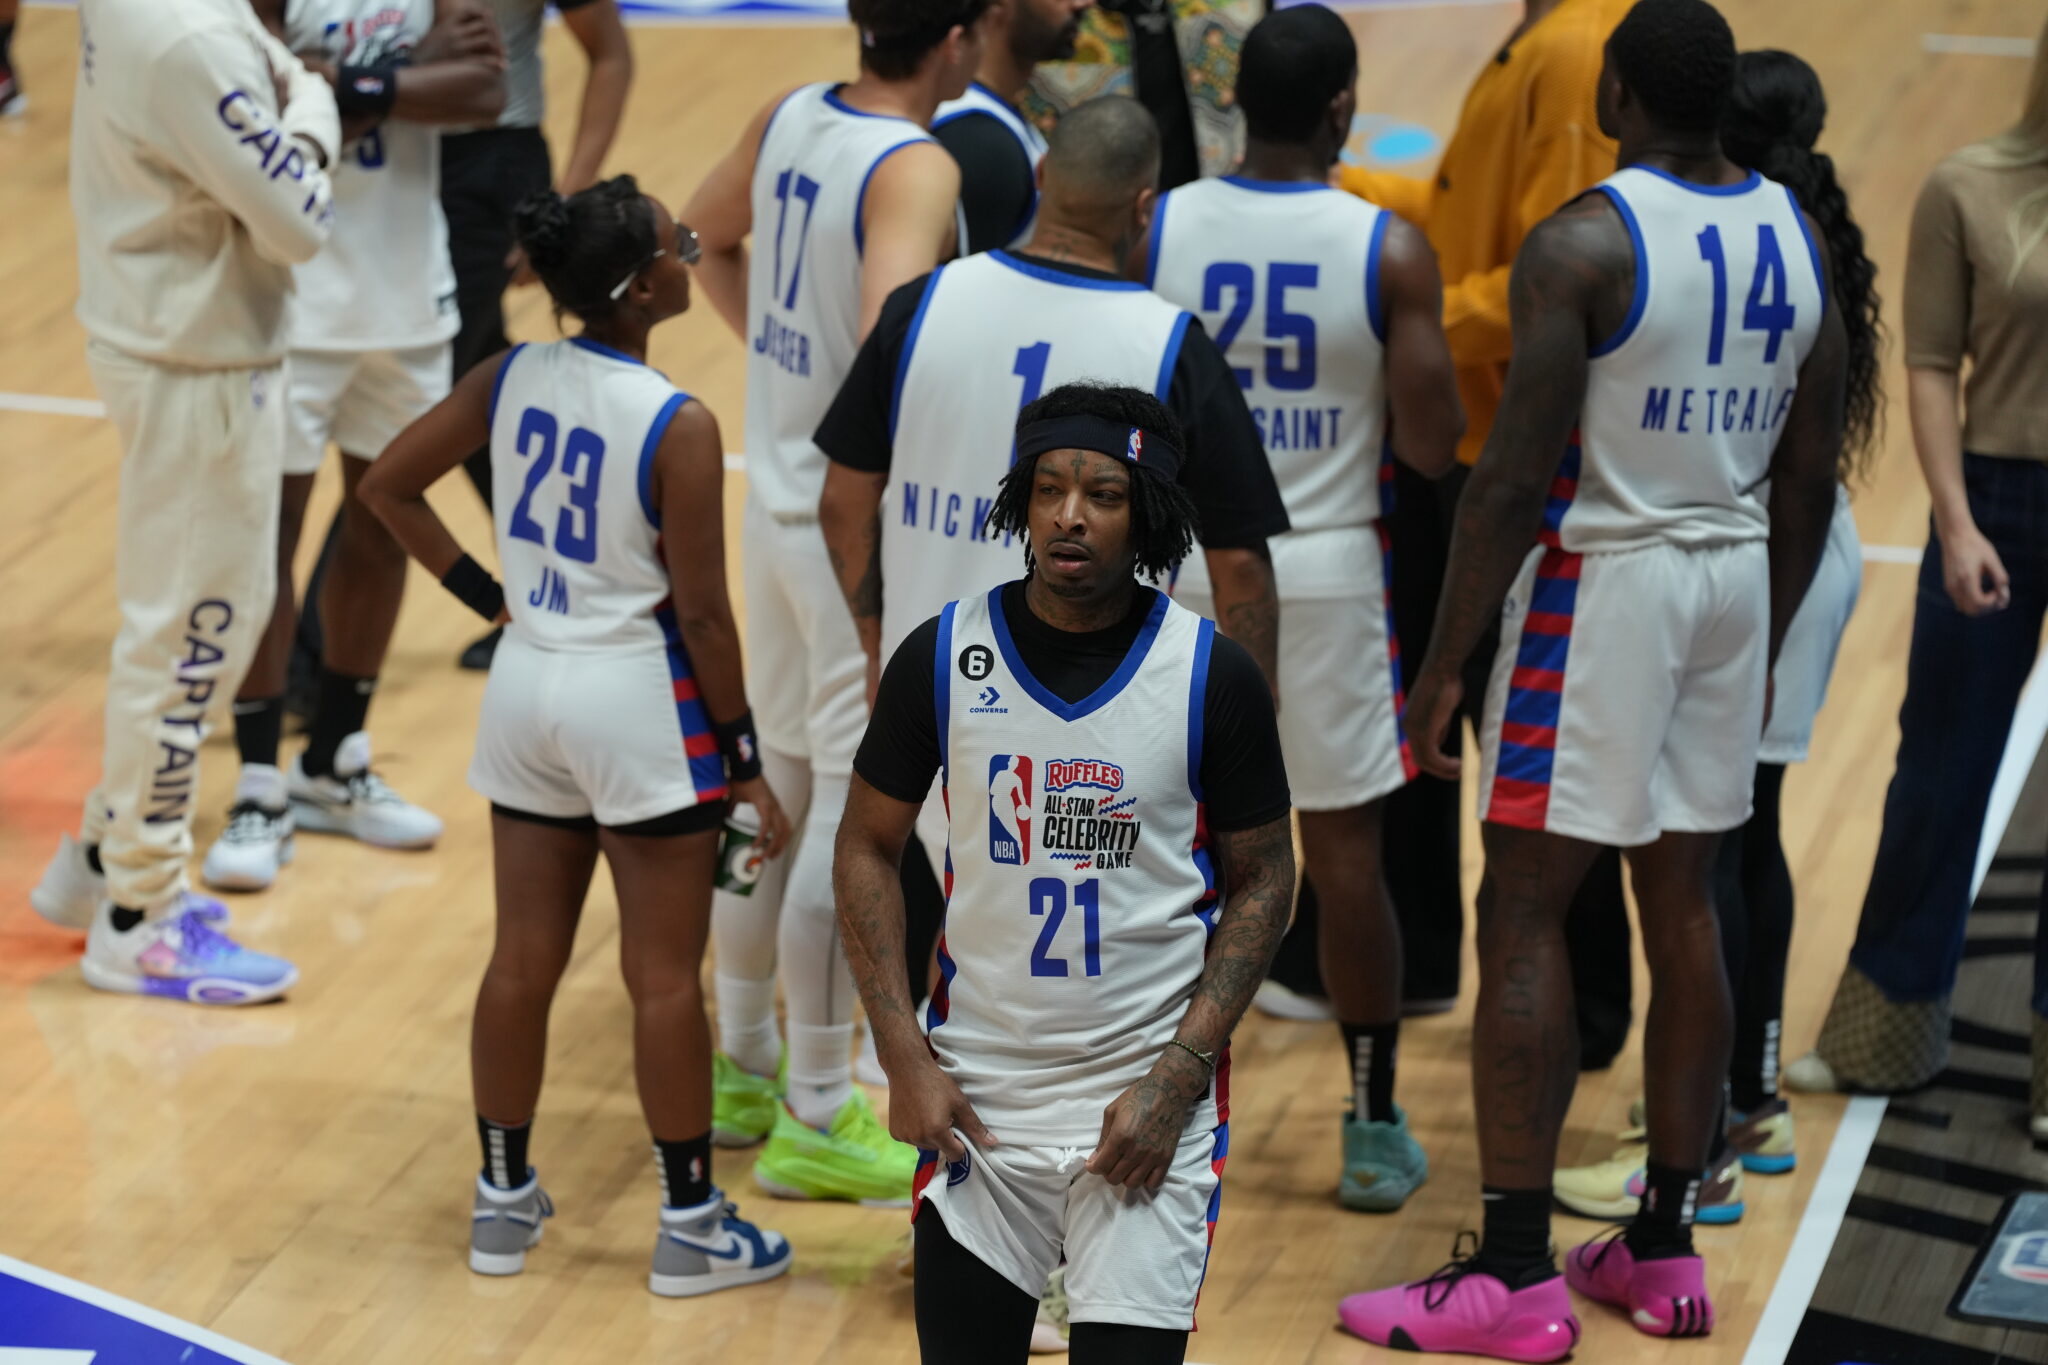 21 Savage at the Celebrity All-Star Game in Pictures - 92.5 The Beat